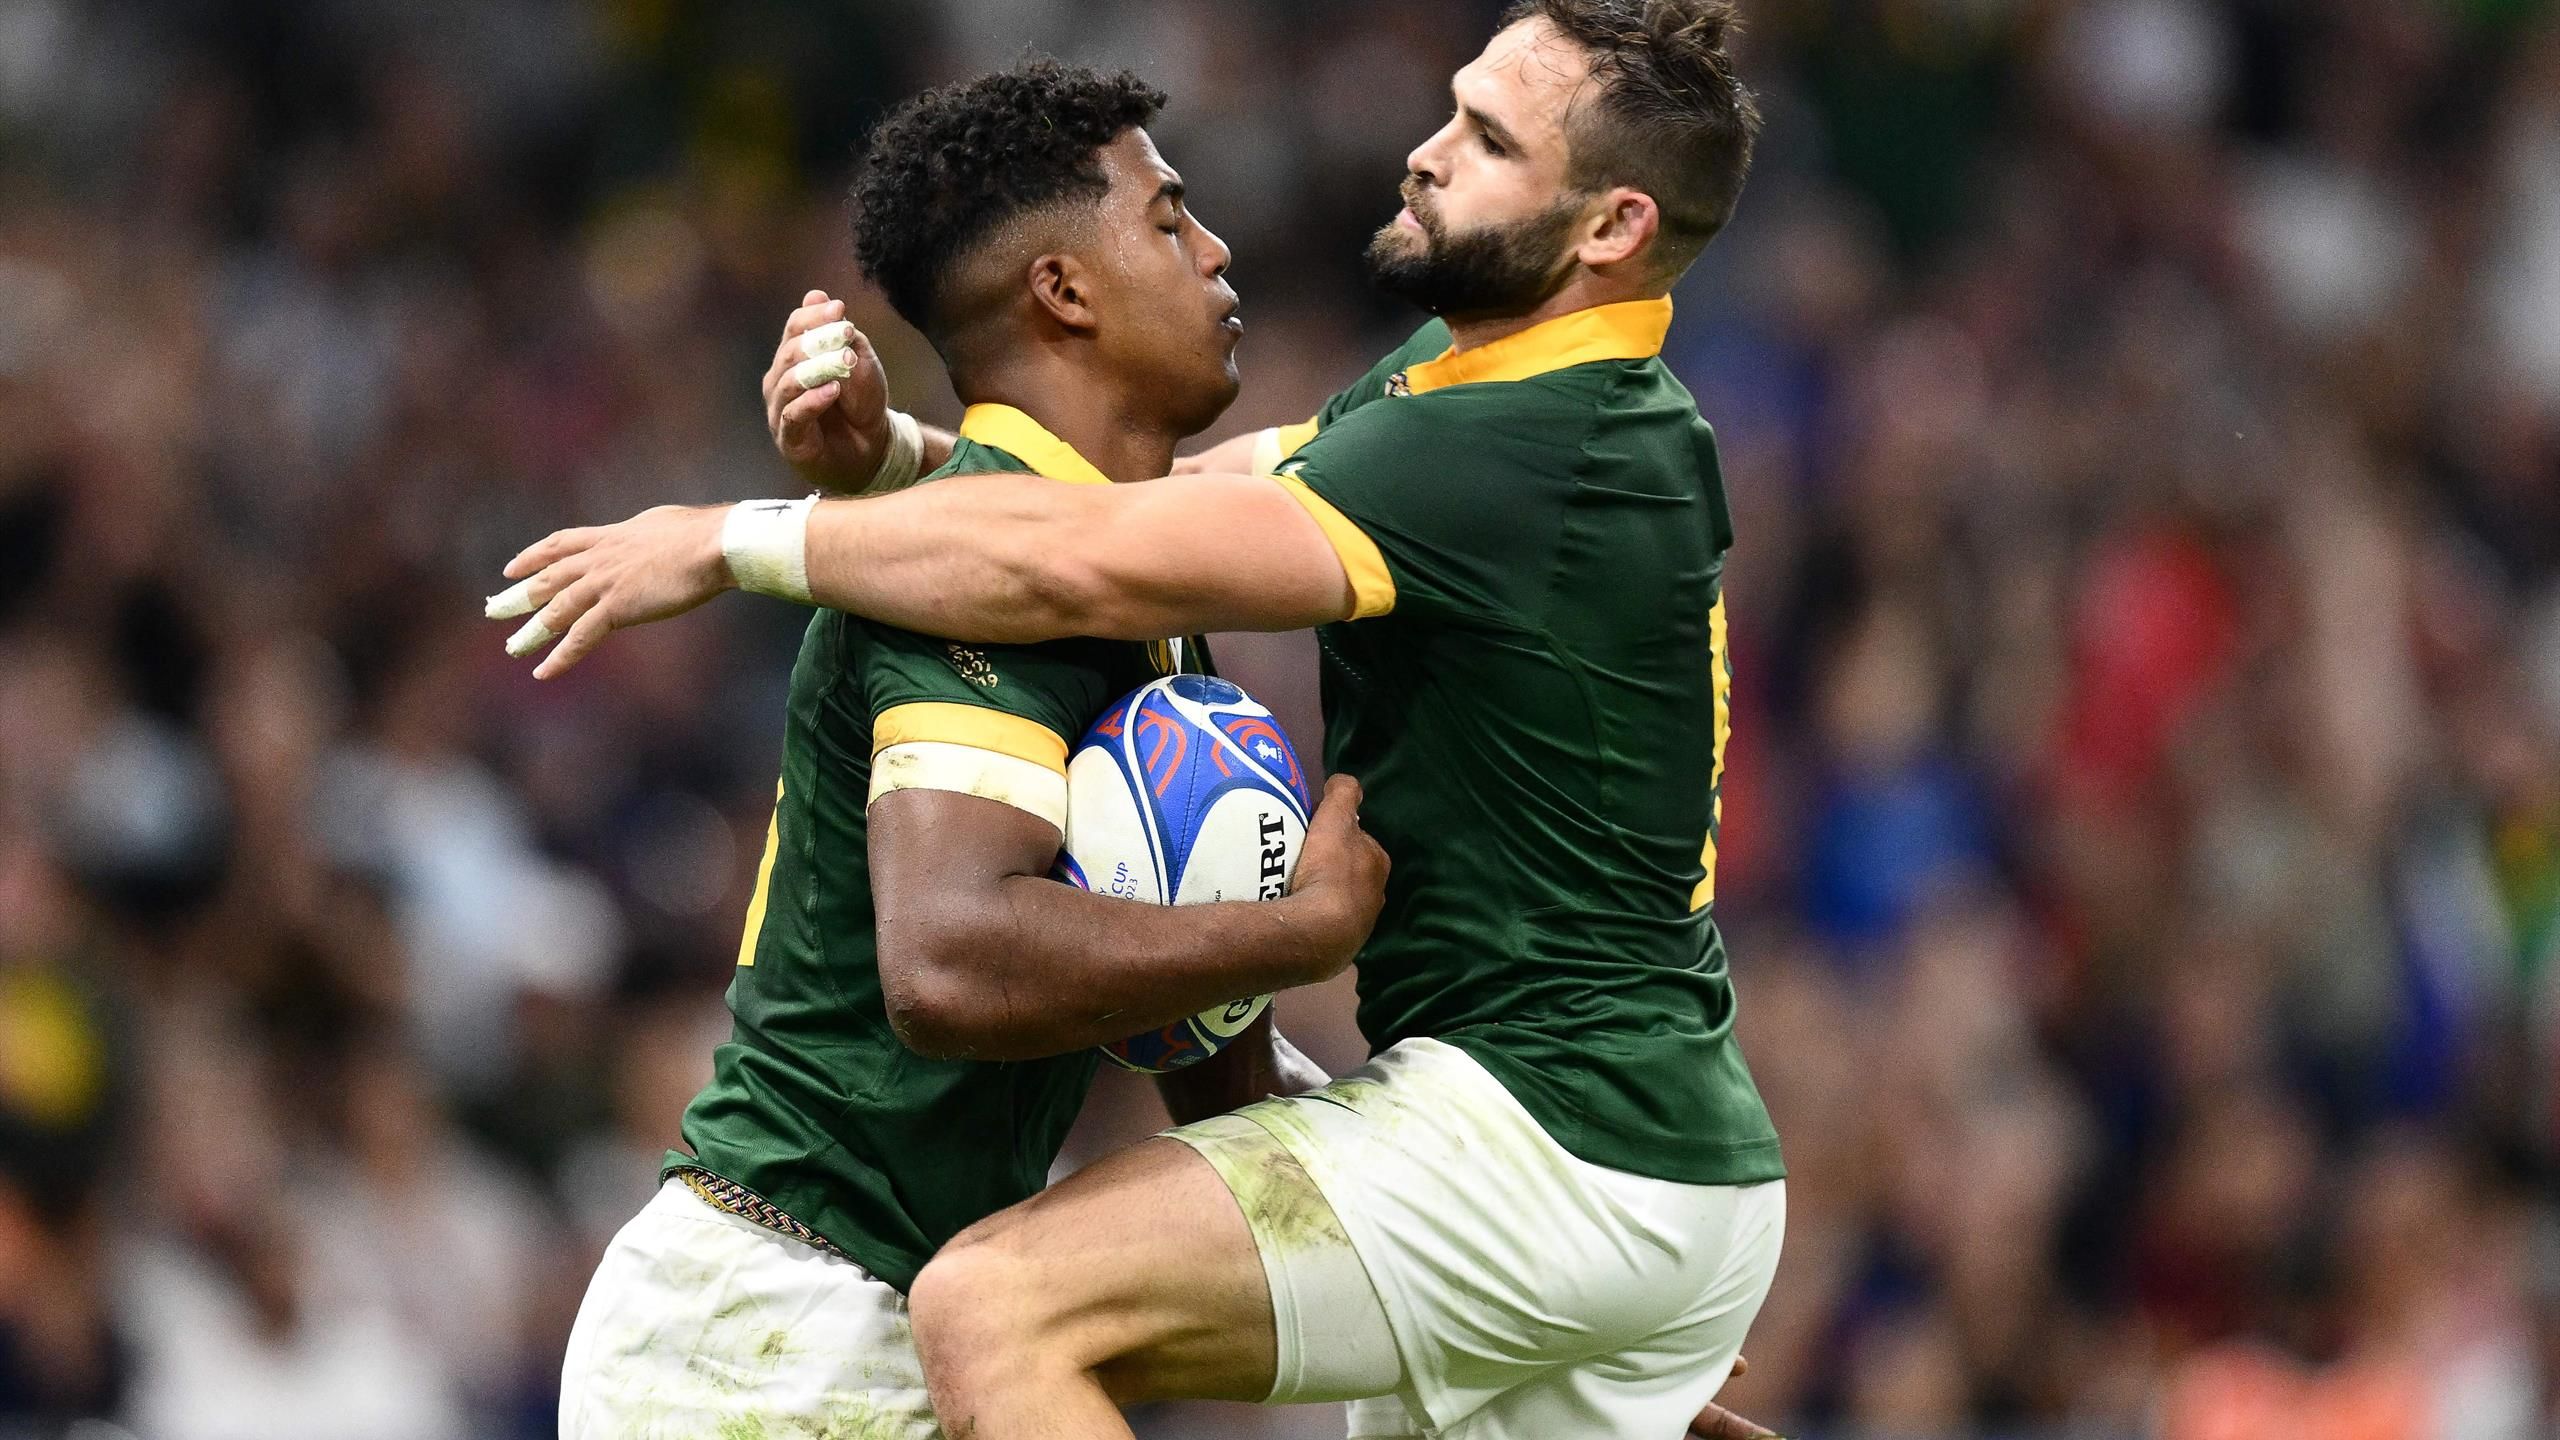 South Africa 49-18 Tonga Springboks put one foot in Rugby World Cup quarter-finals with bonus-point win